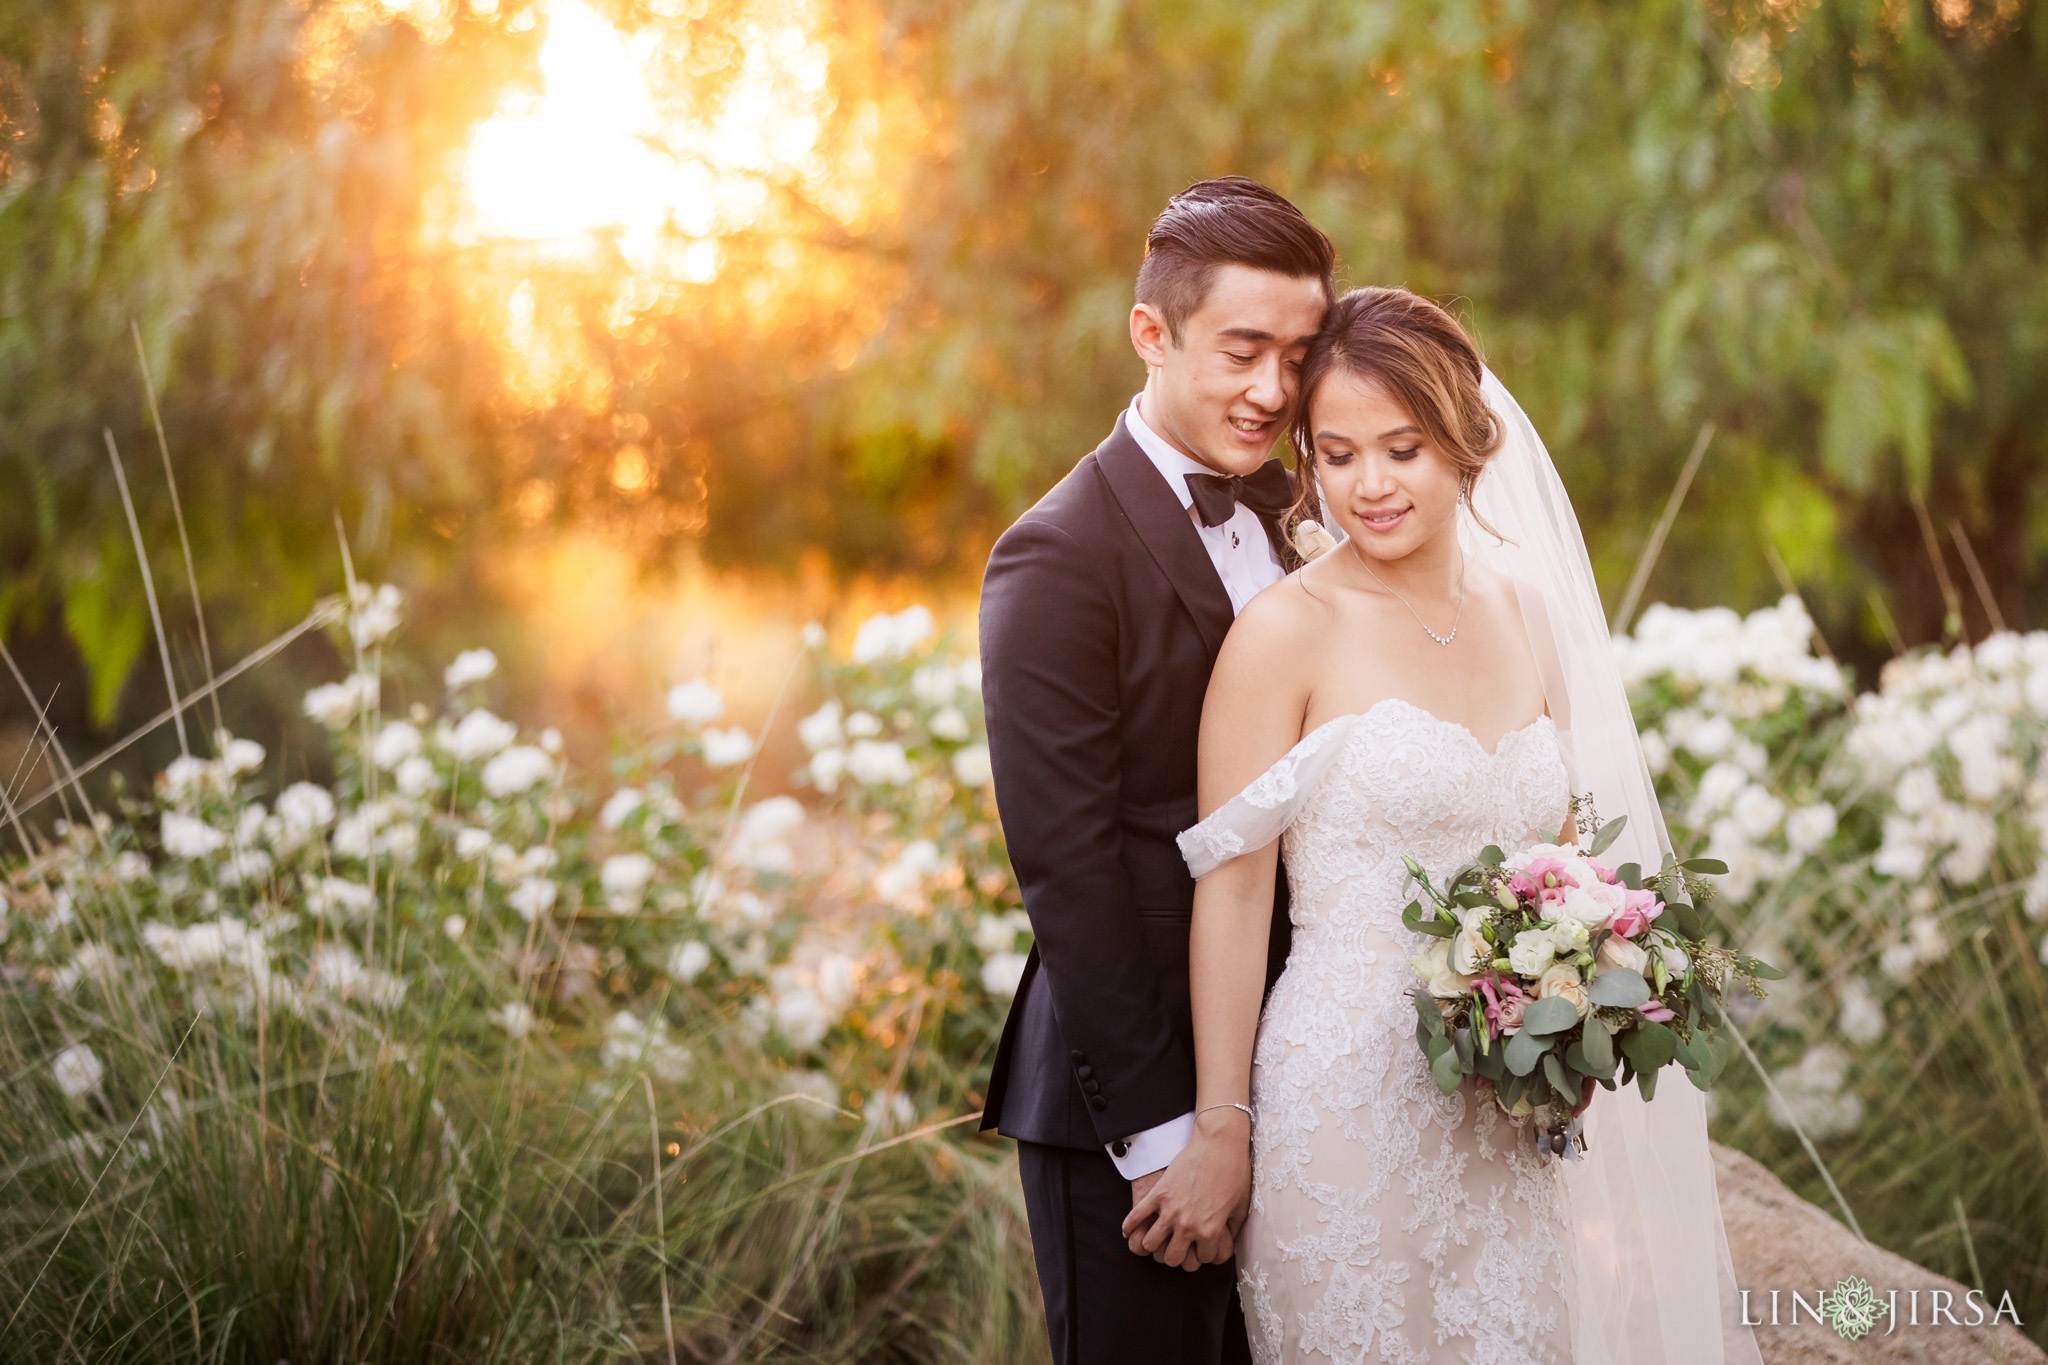 What is the Average Amount to Spend on a Wedding Photographer?